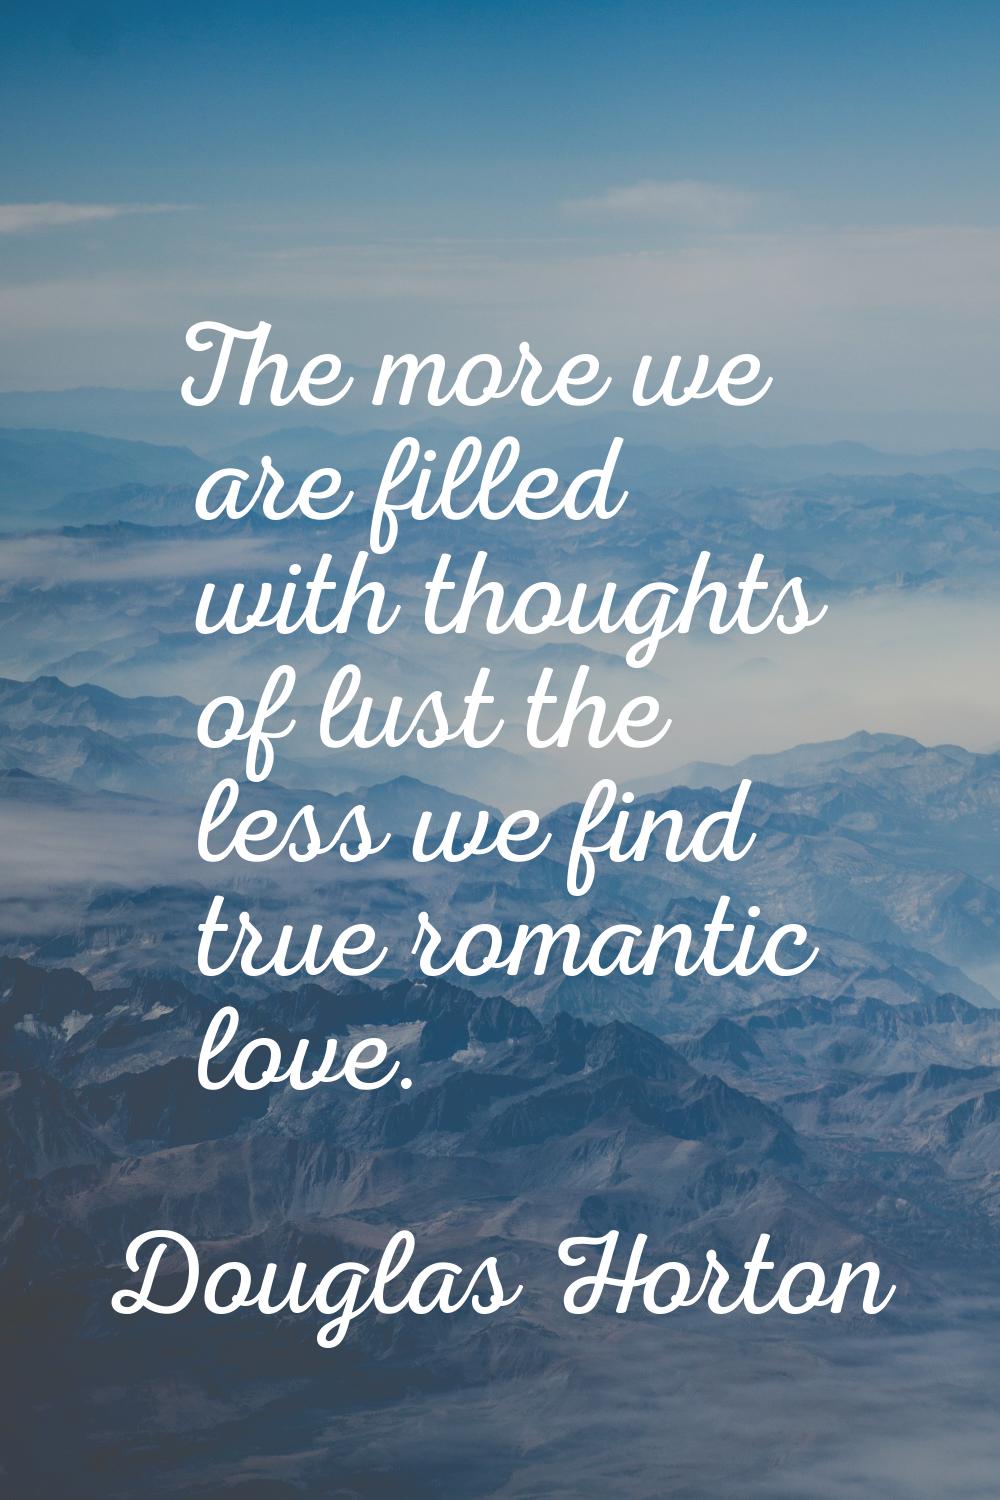 The more we are filled with thoughts of lust the less we find true romantic love.